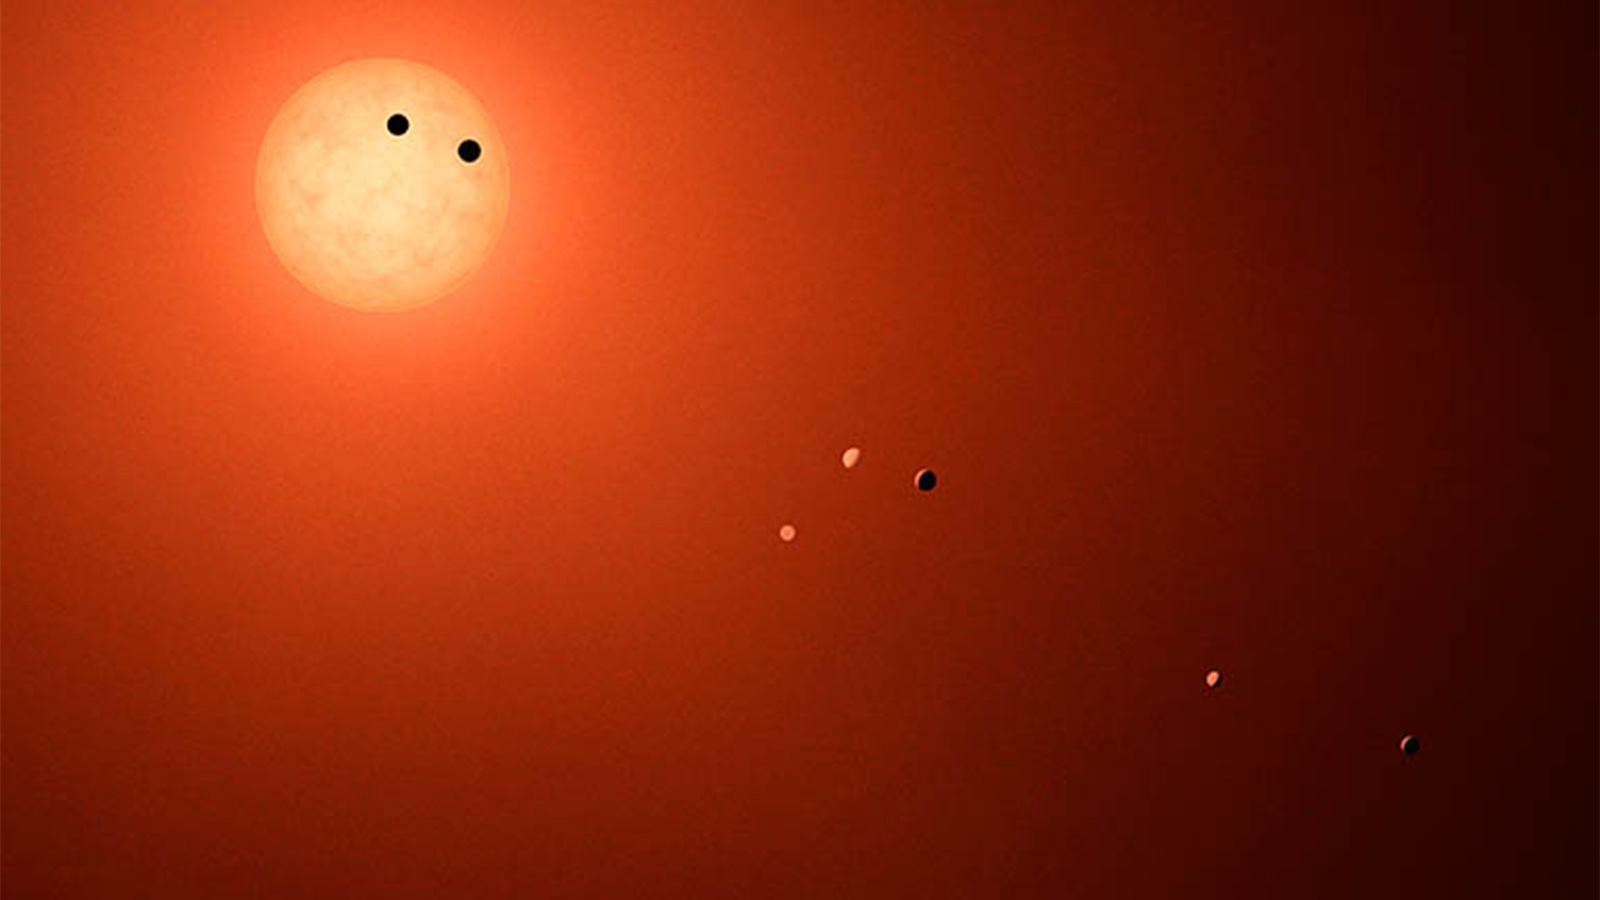 The TRAPPIST-1 system consists of seven Earth-sized planets orbiting a red dwarf star.